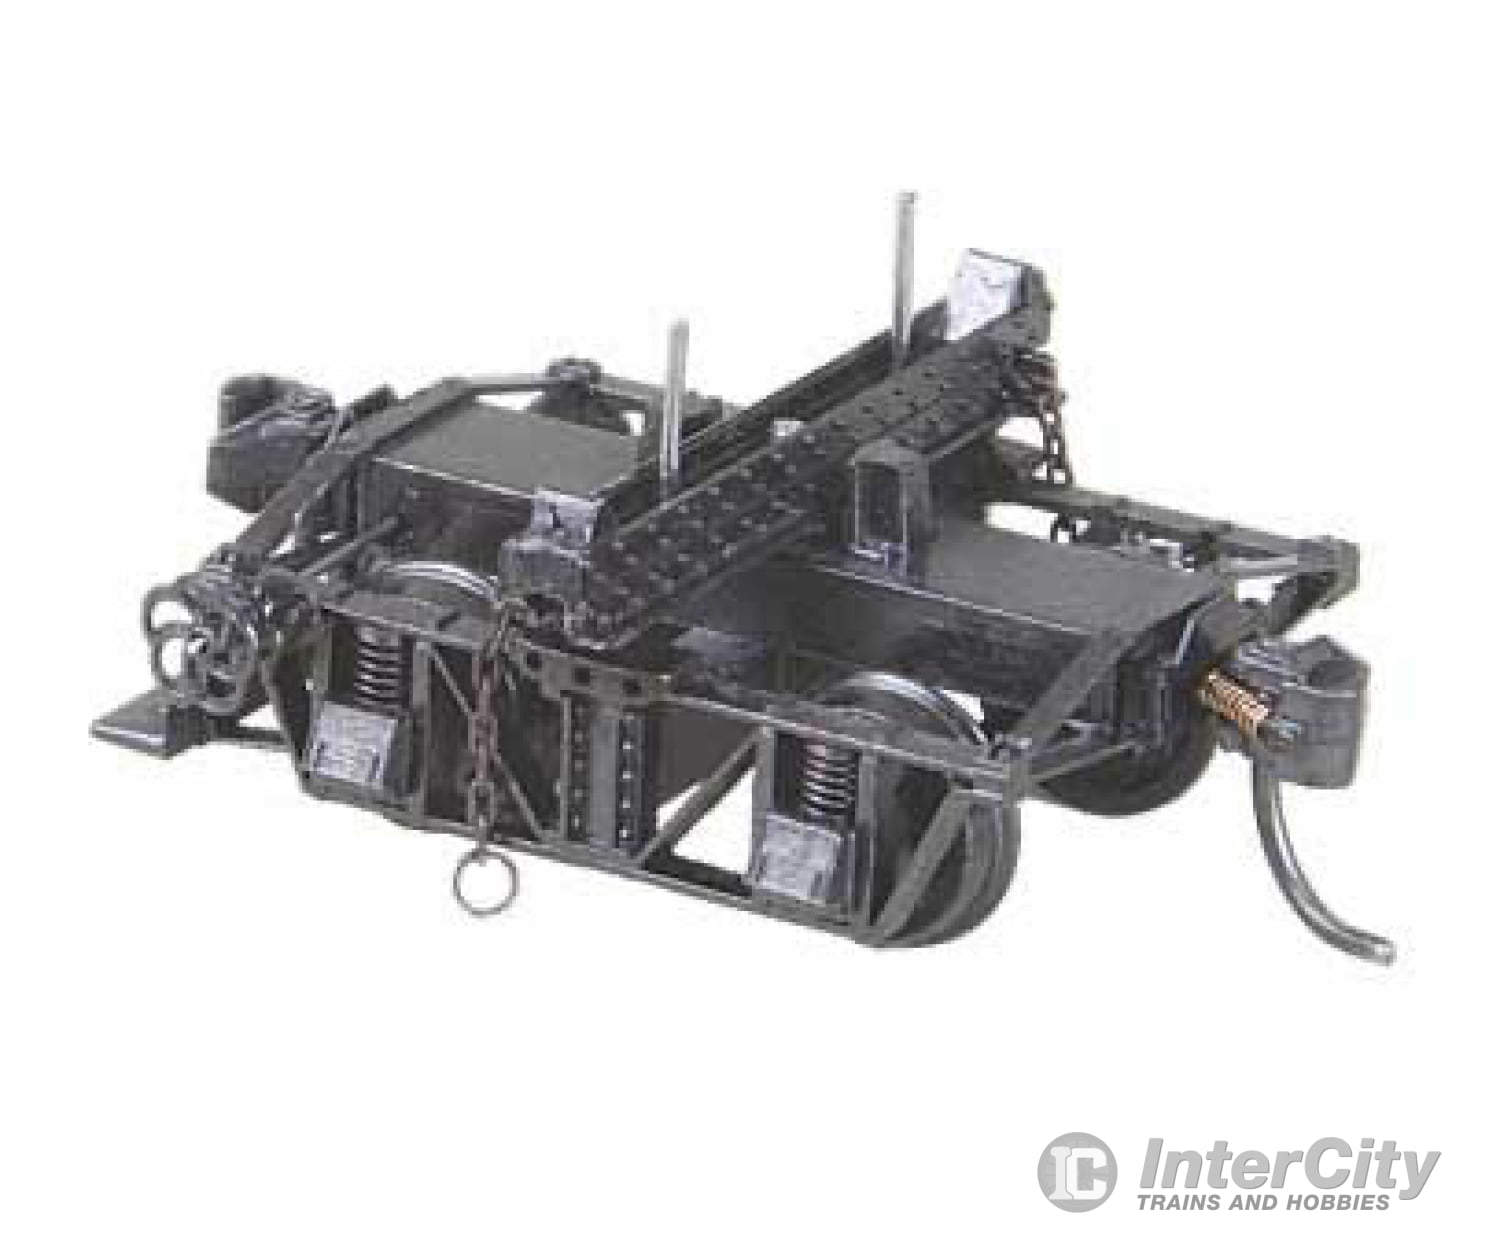 Kadee 107 #107 Disconnect Log Car Trucks without Logs - Kit -- Undecorated - Default Title (CH-380-107)